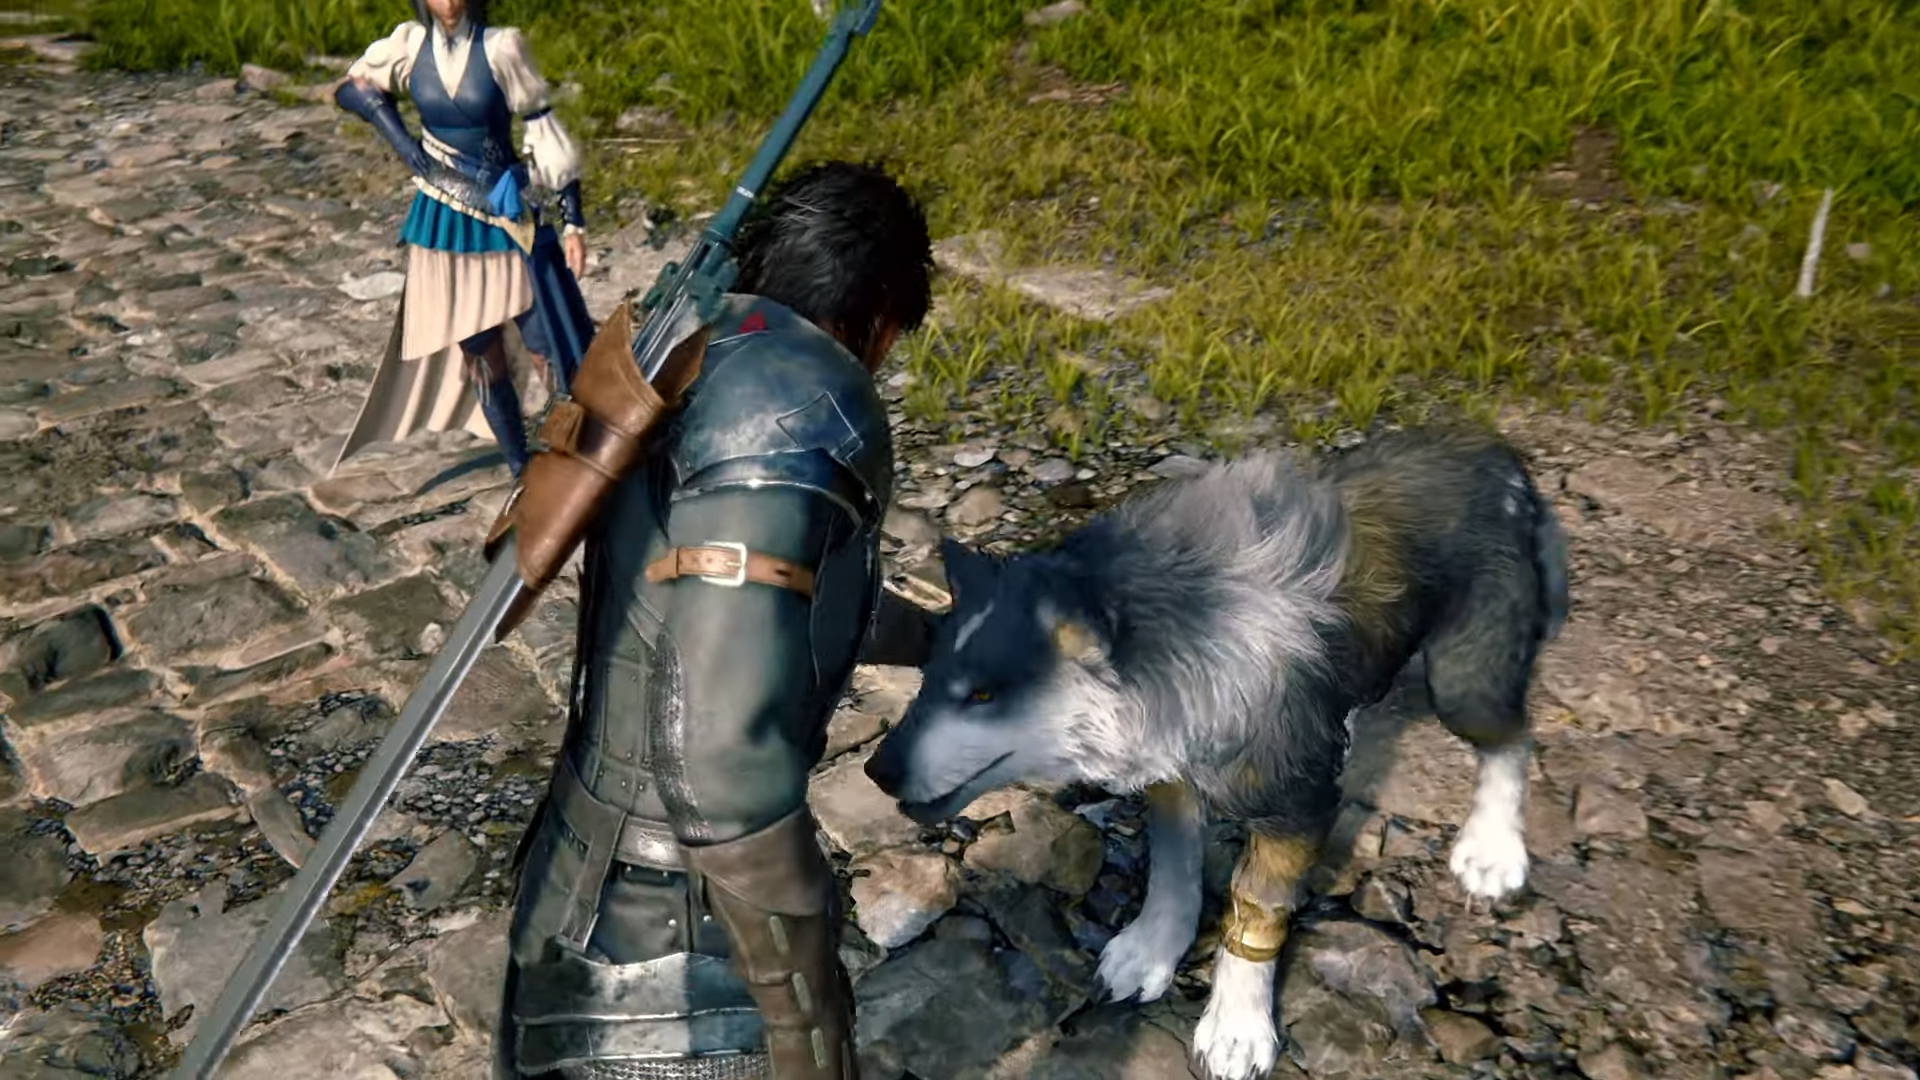 Clive pets the dog